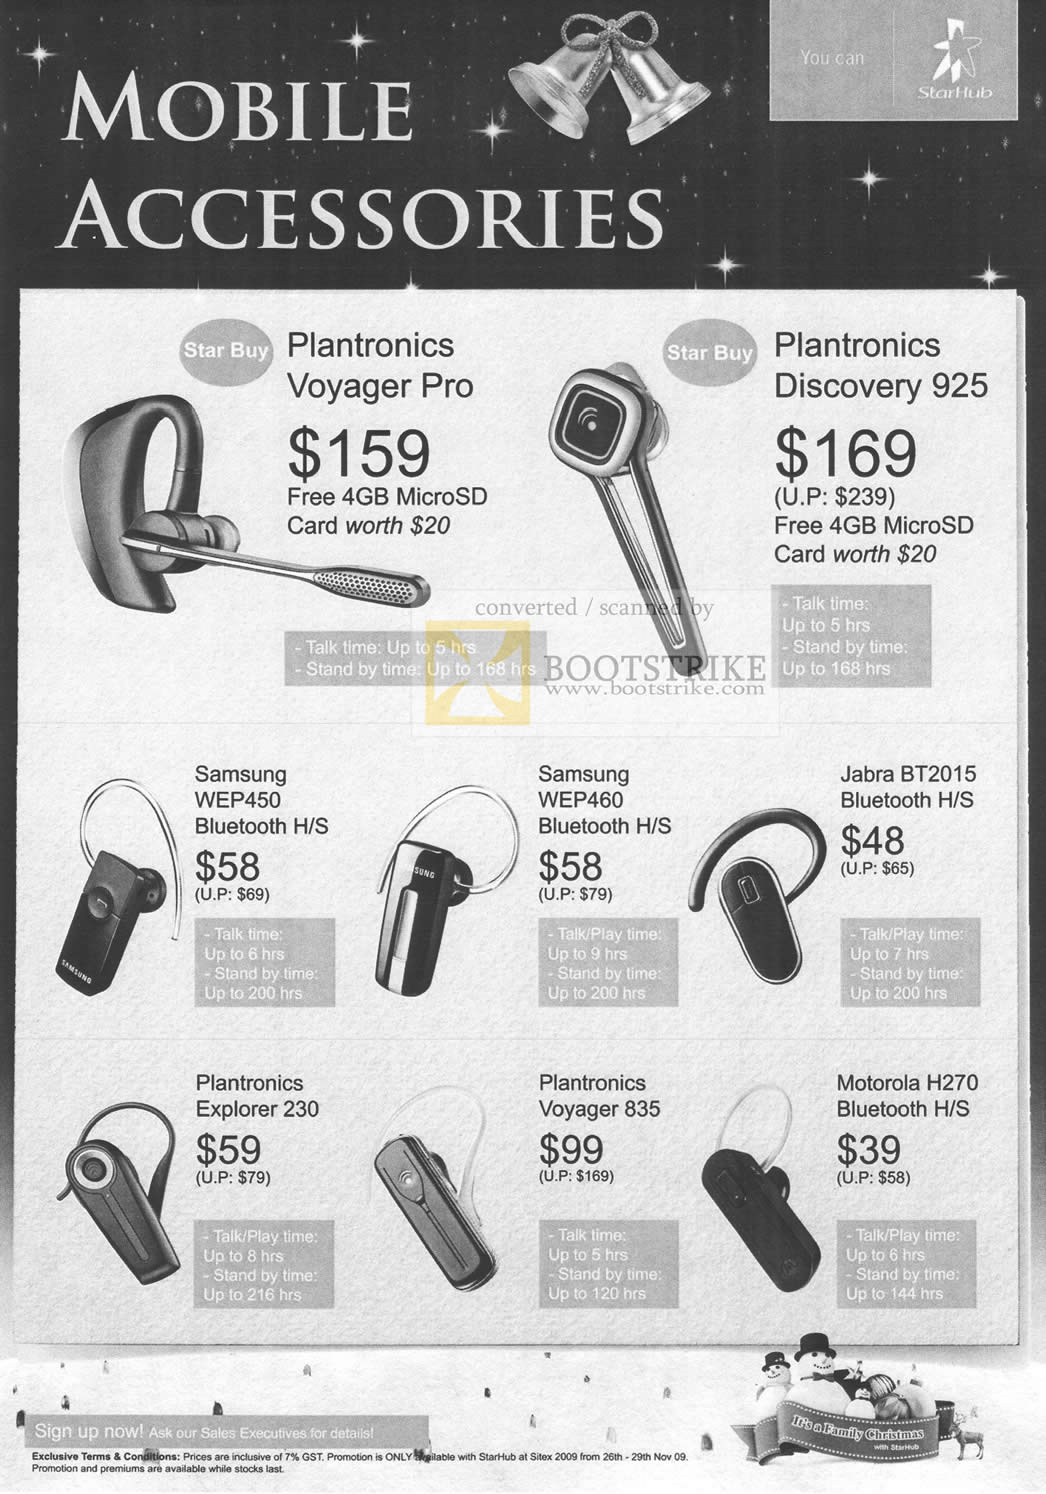 Sitex 2009 price list image brochure of Starhub Mobile Accessories Plantronics Voyager Discovery Samsung Jabra Bluetooth